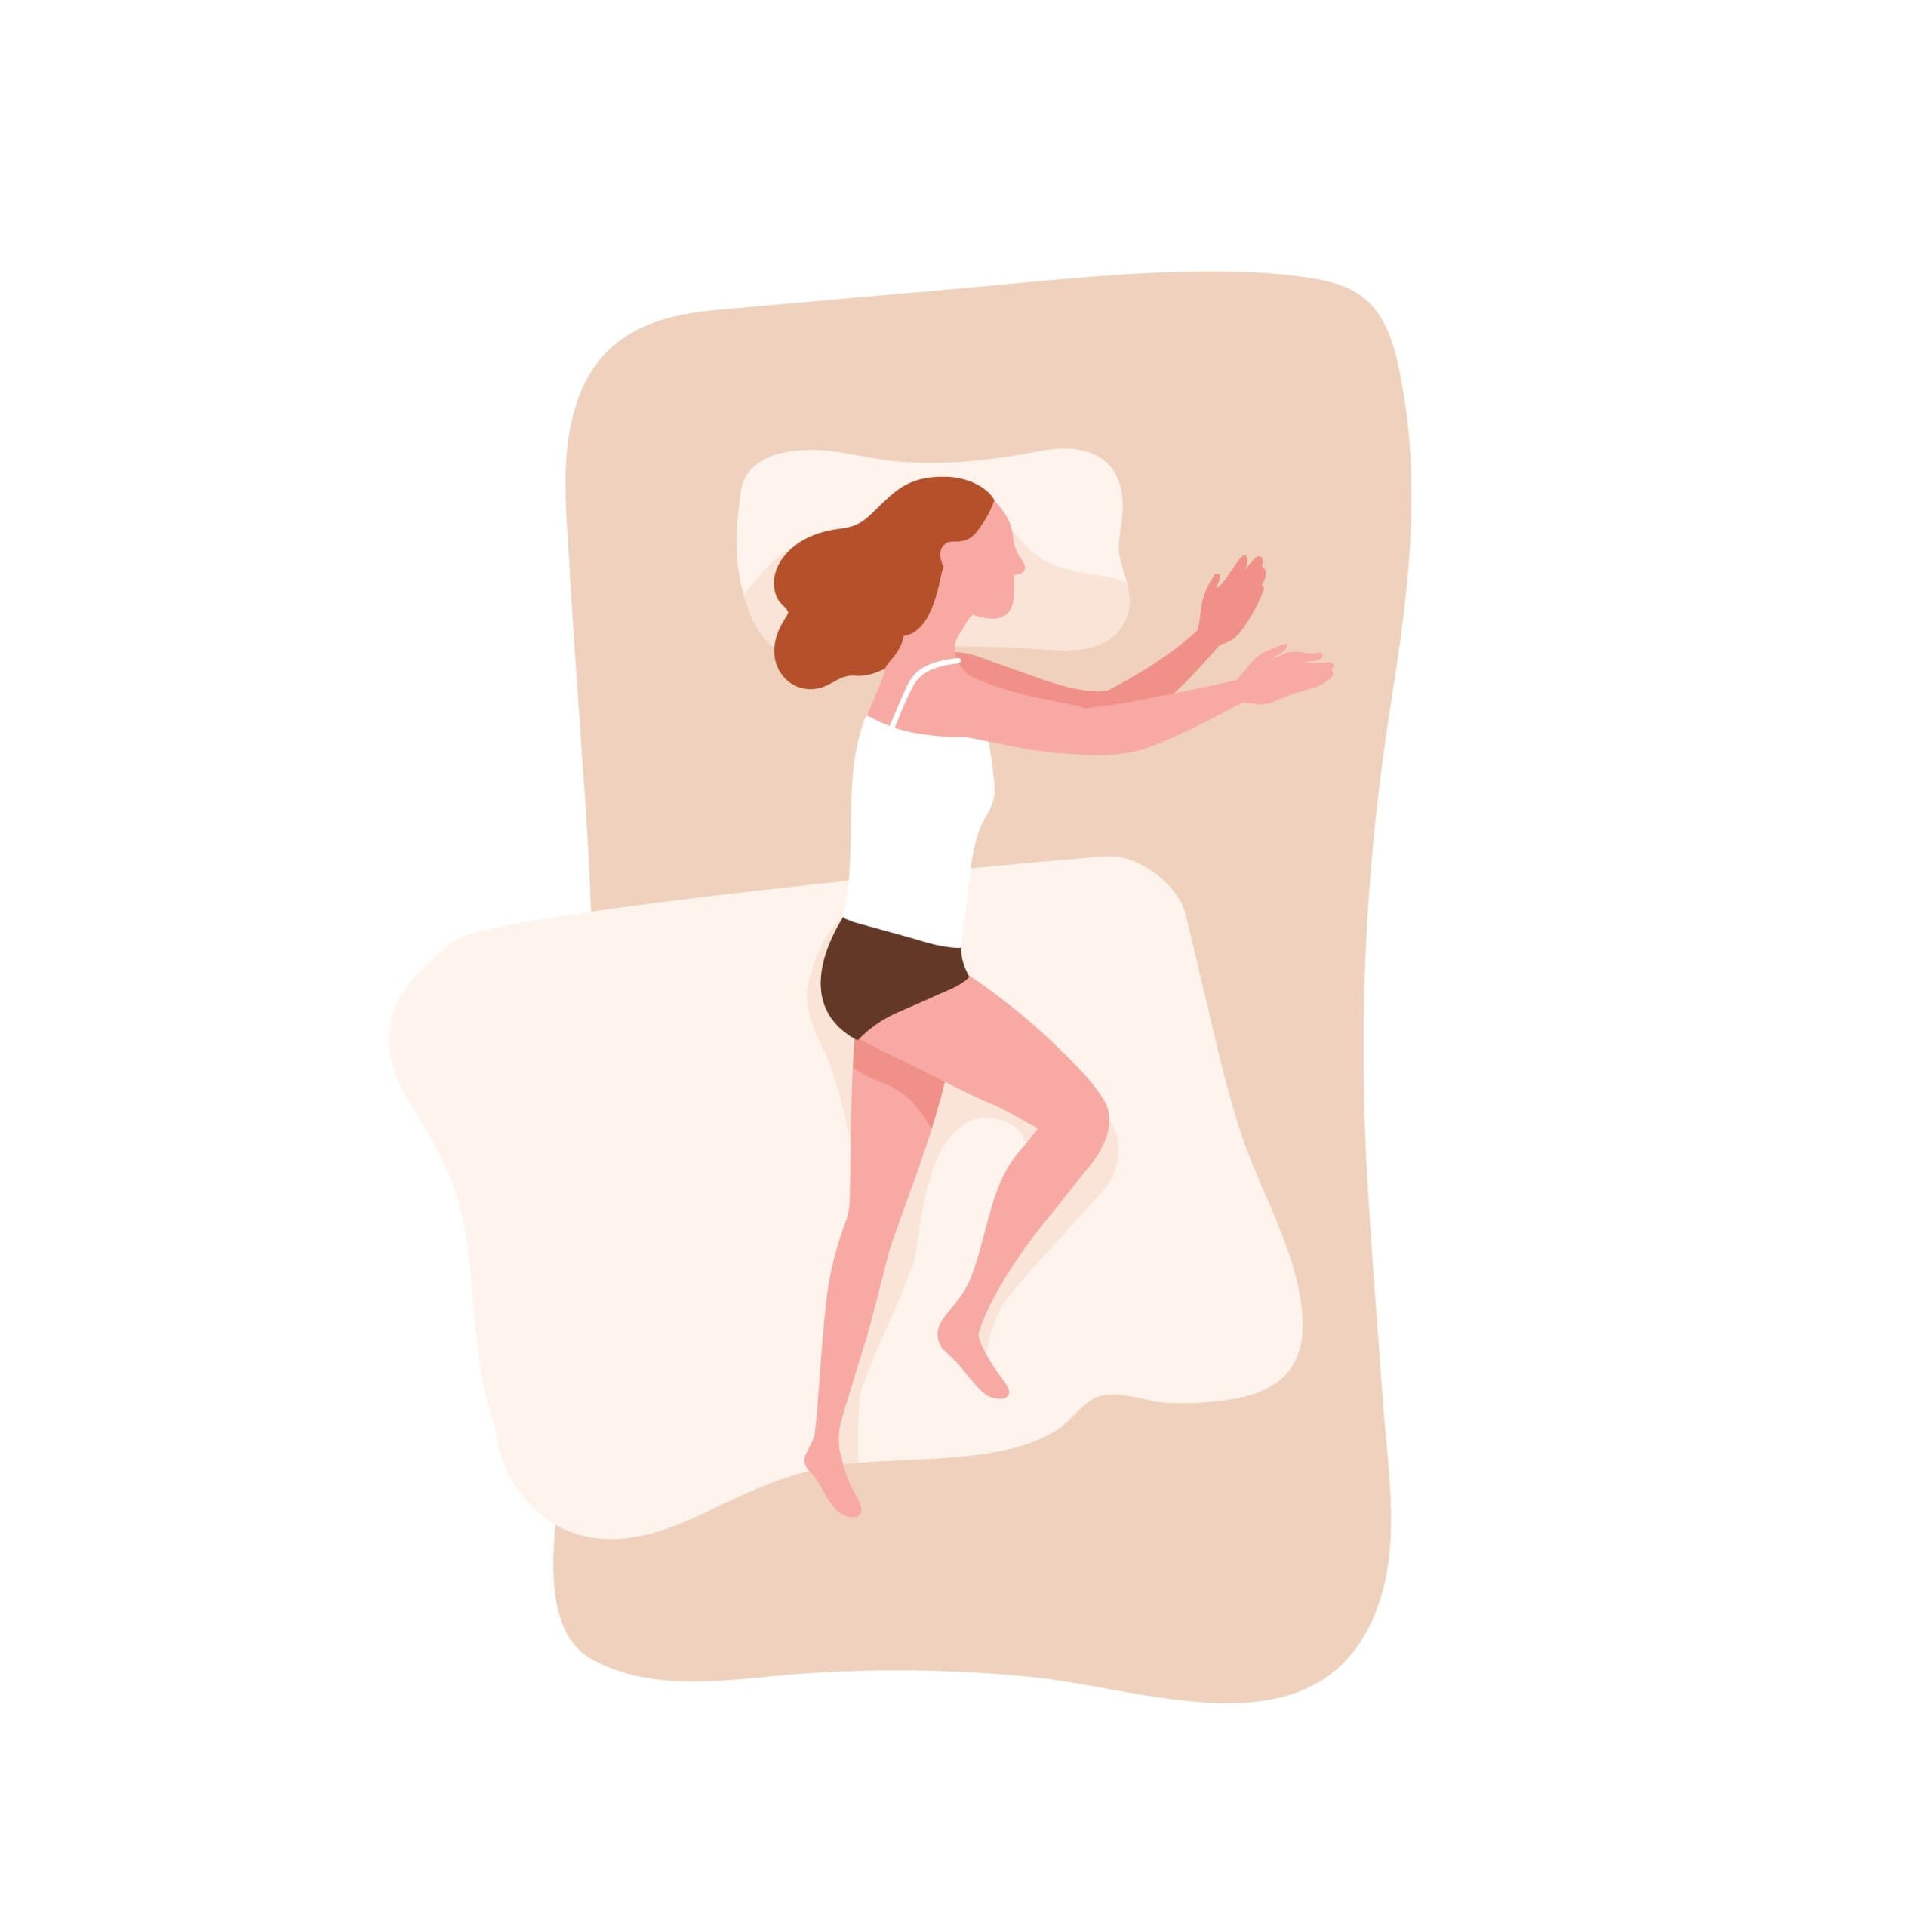 Cartoon image of a female sleeping in the yearner position.